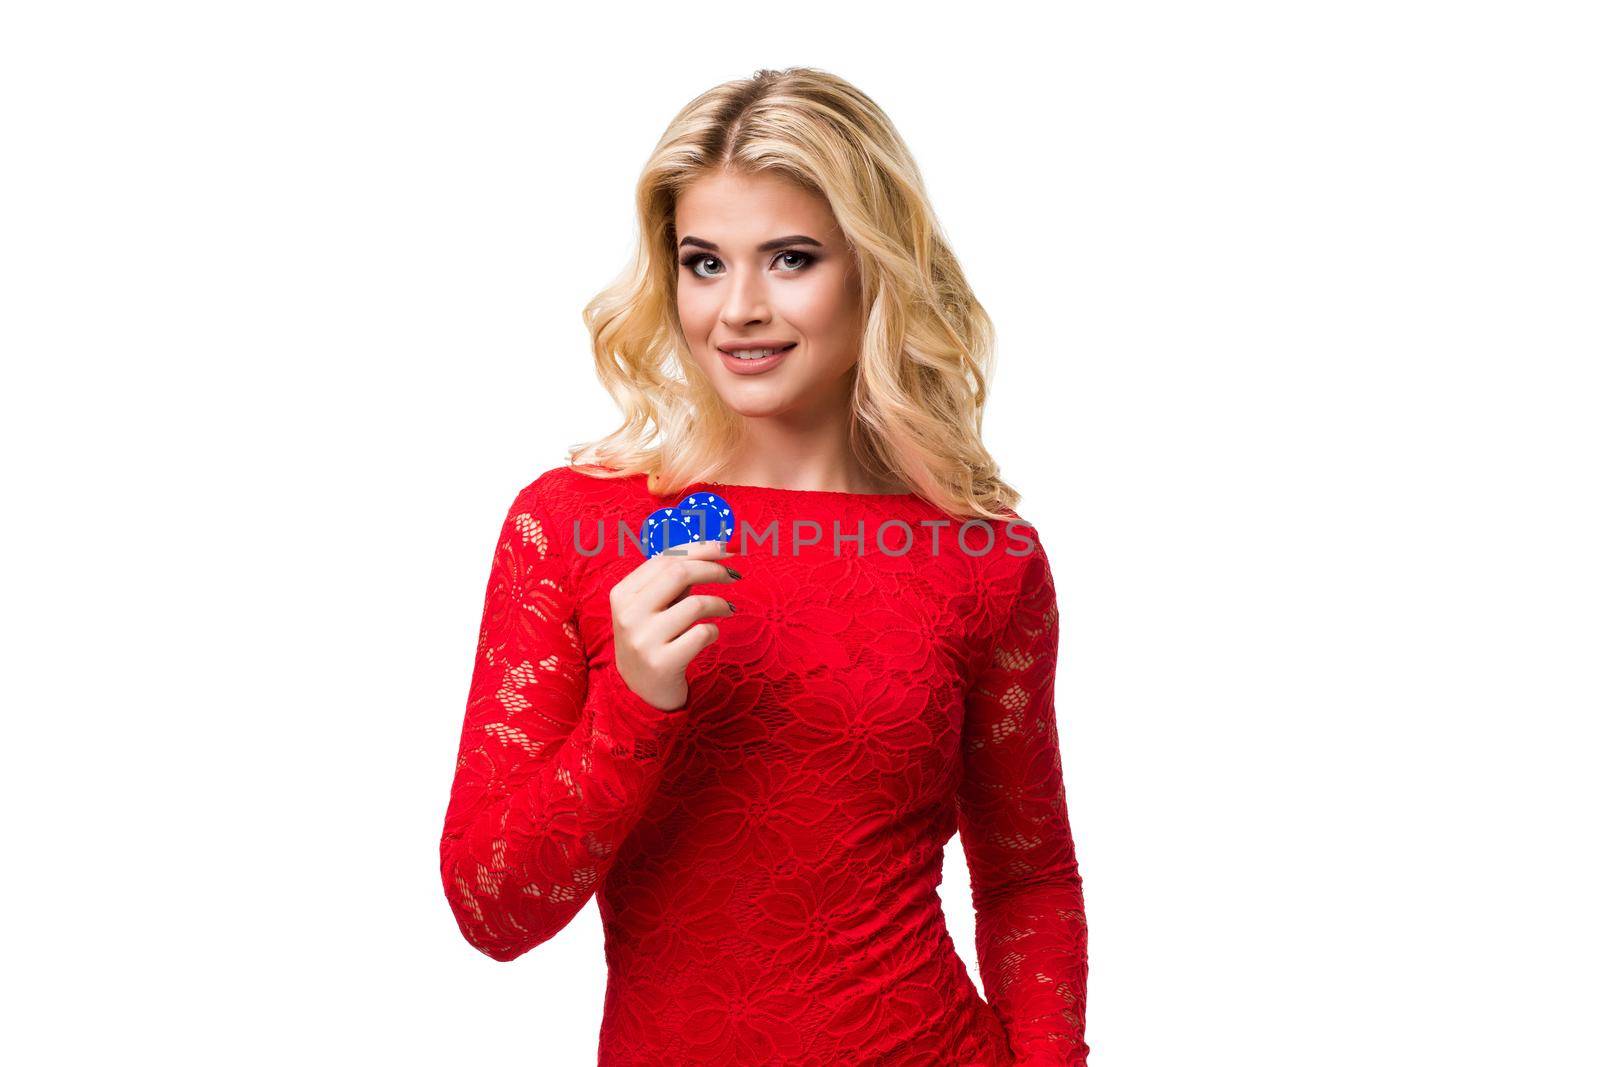 Caucasian young woman with long light blonde hair in evening outfit holding playing chips. Isolated on white background. Poker